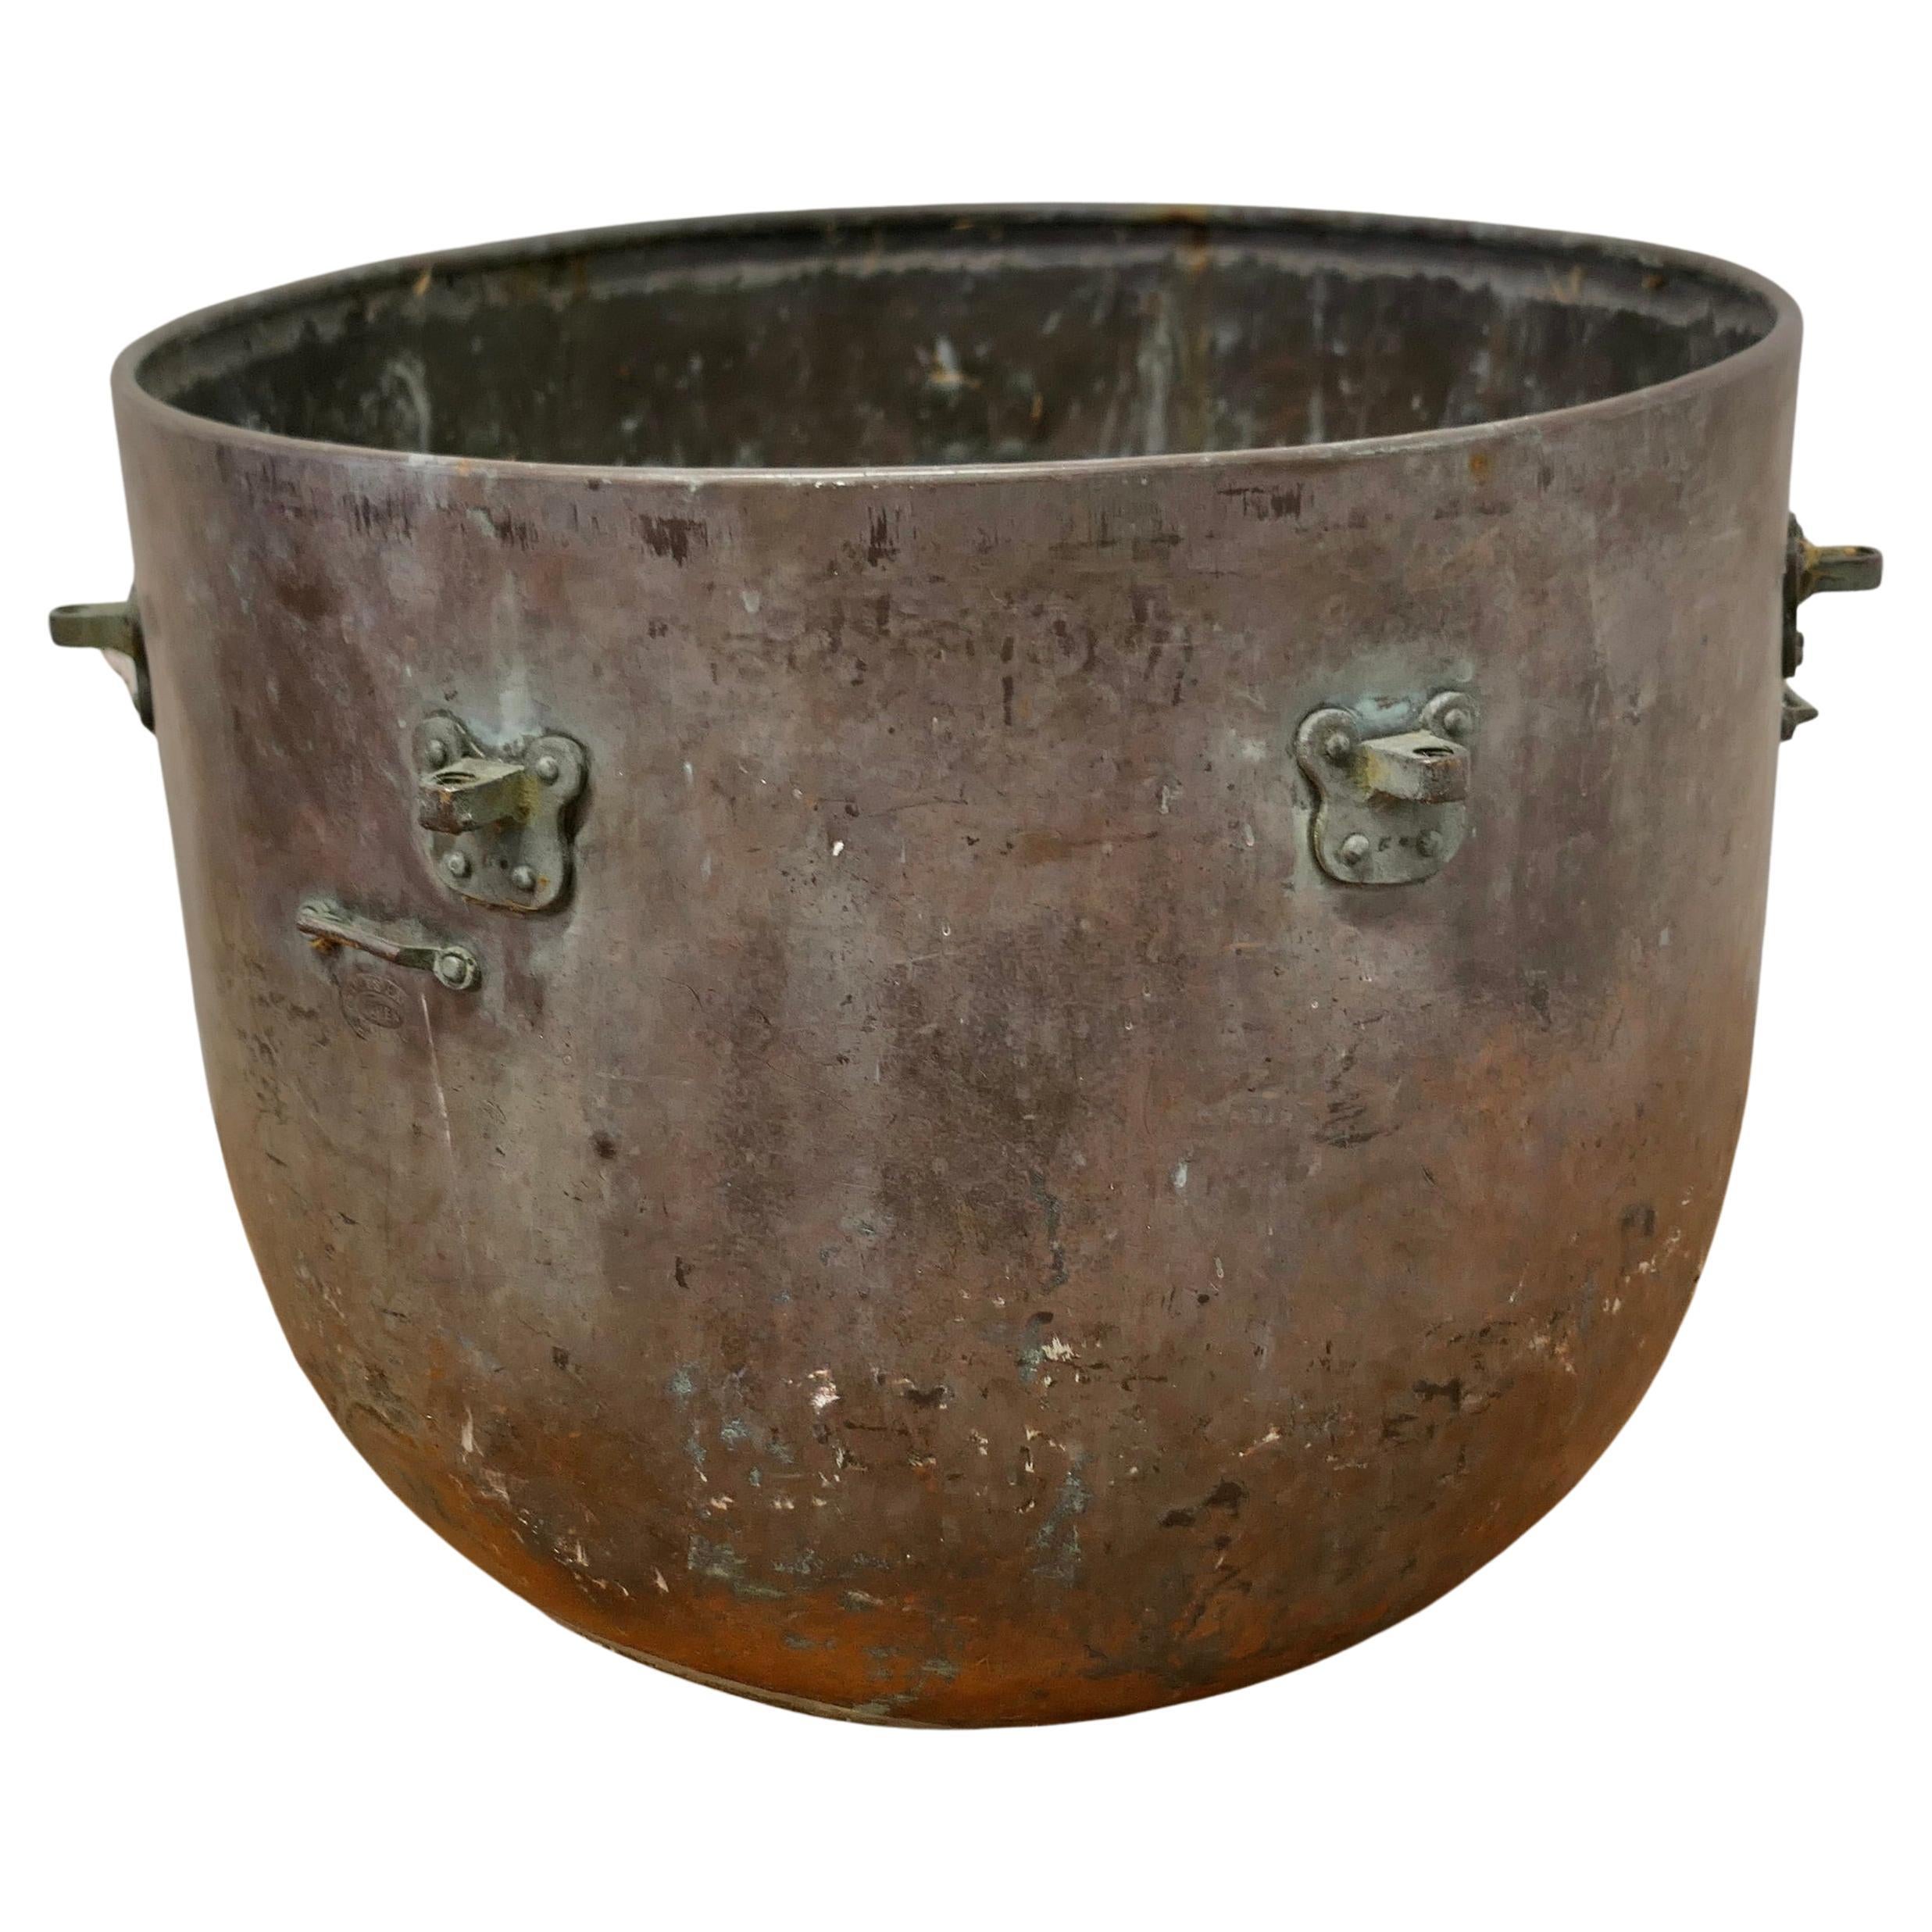 What is a copper cauldron used for?